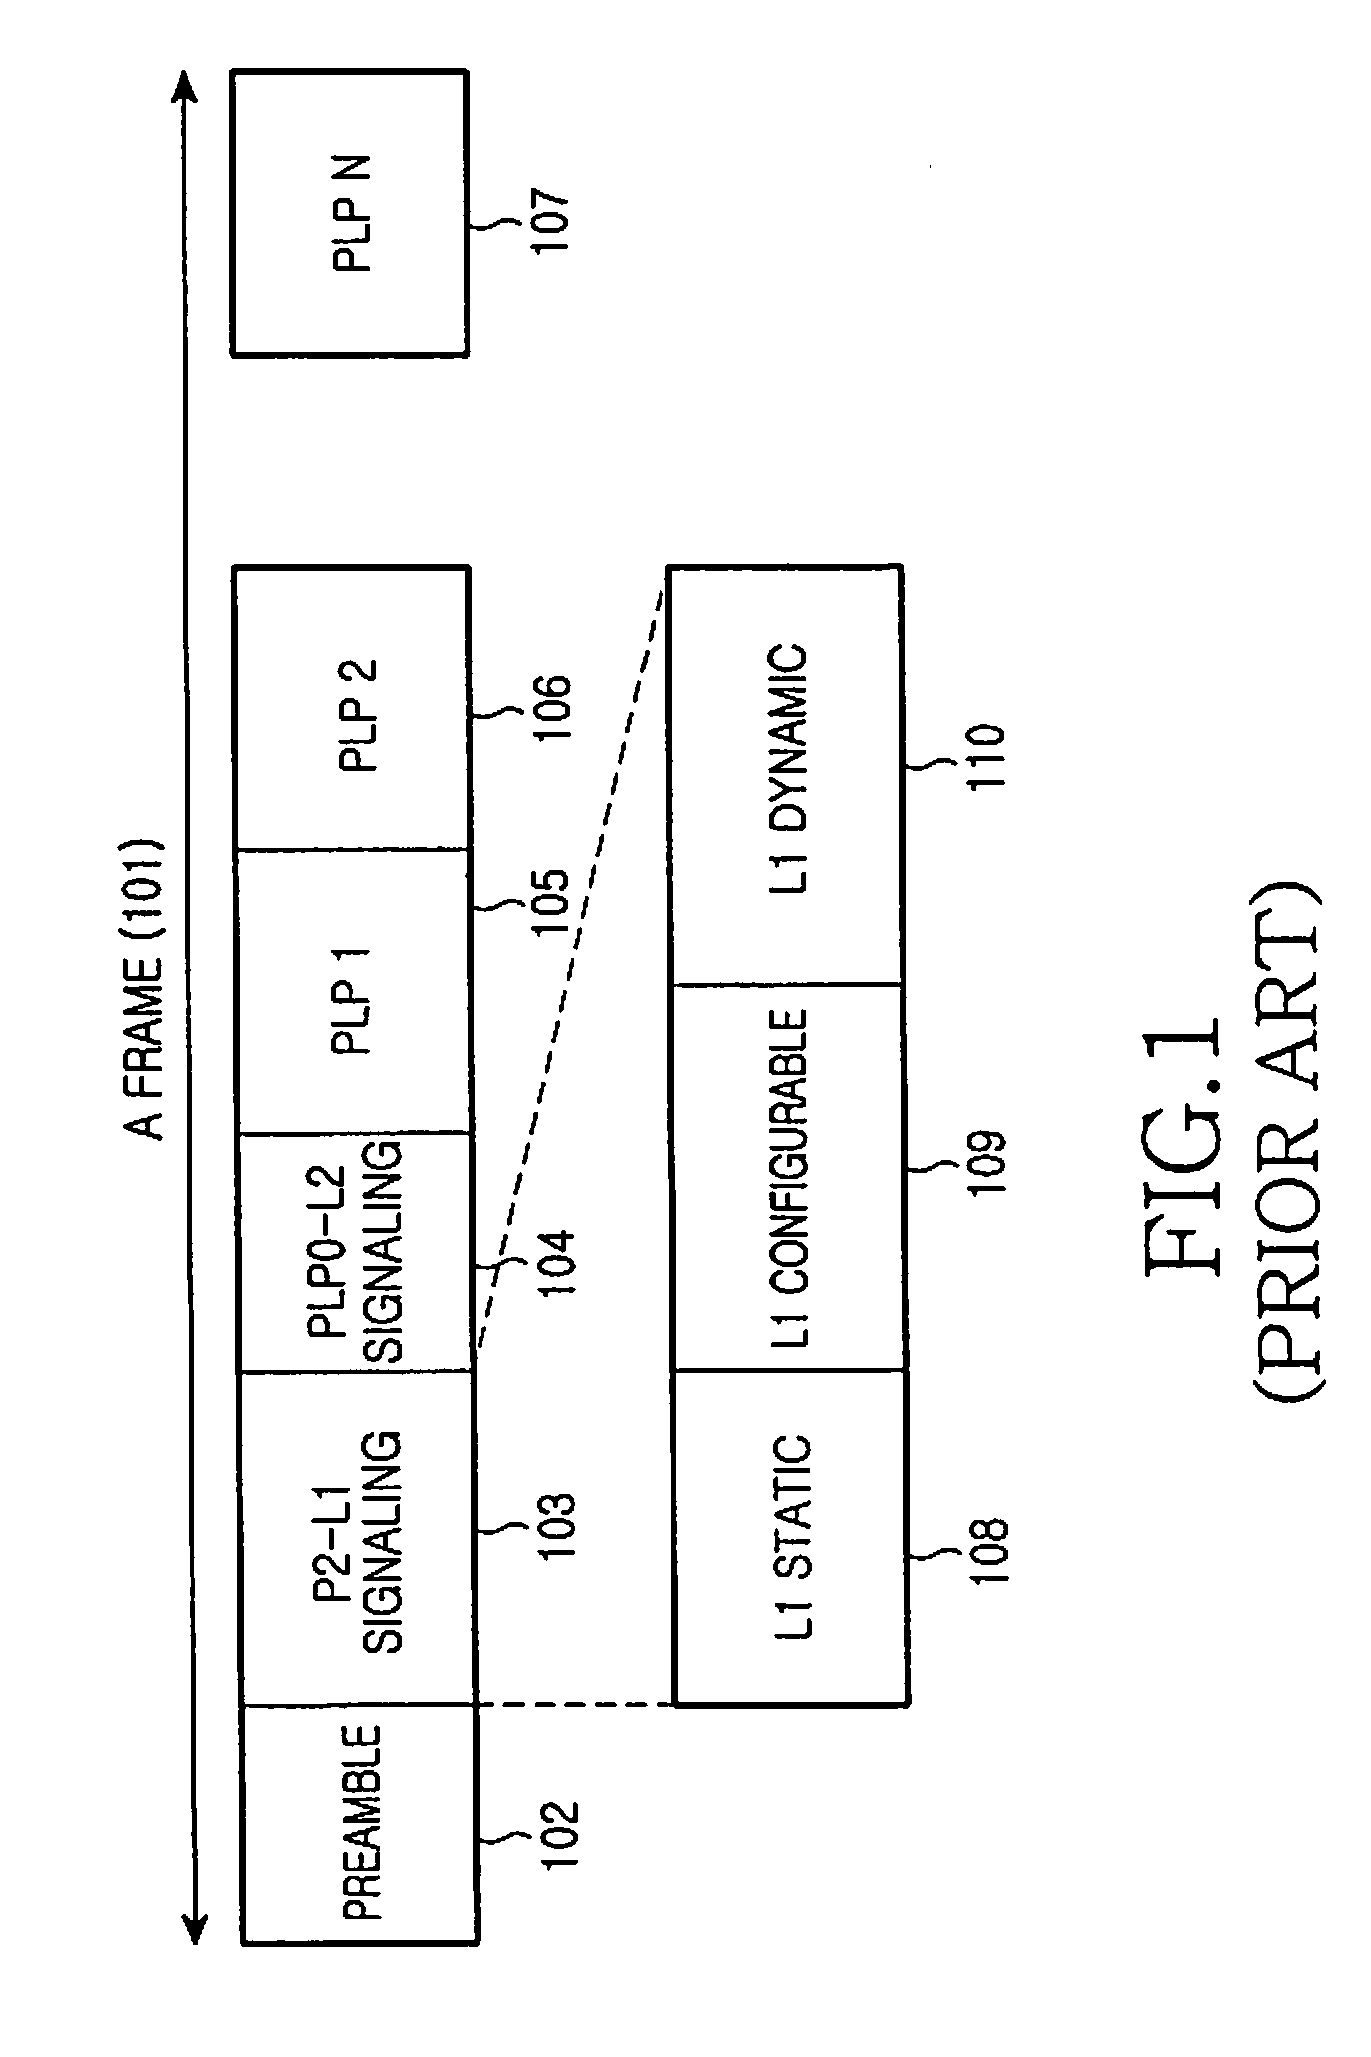 Apparatus and method for transmitting and receiving a frame including control information in a broadcasting system